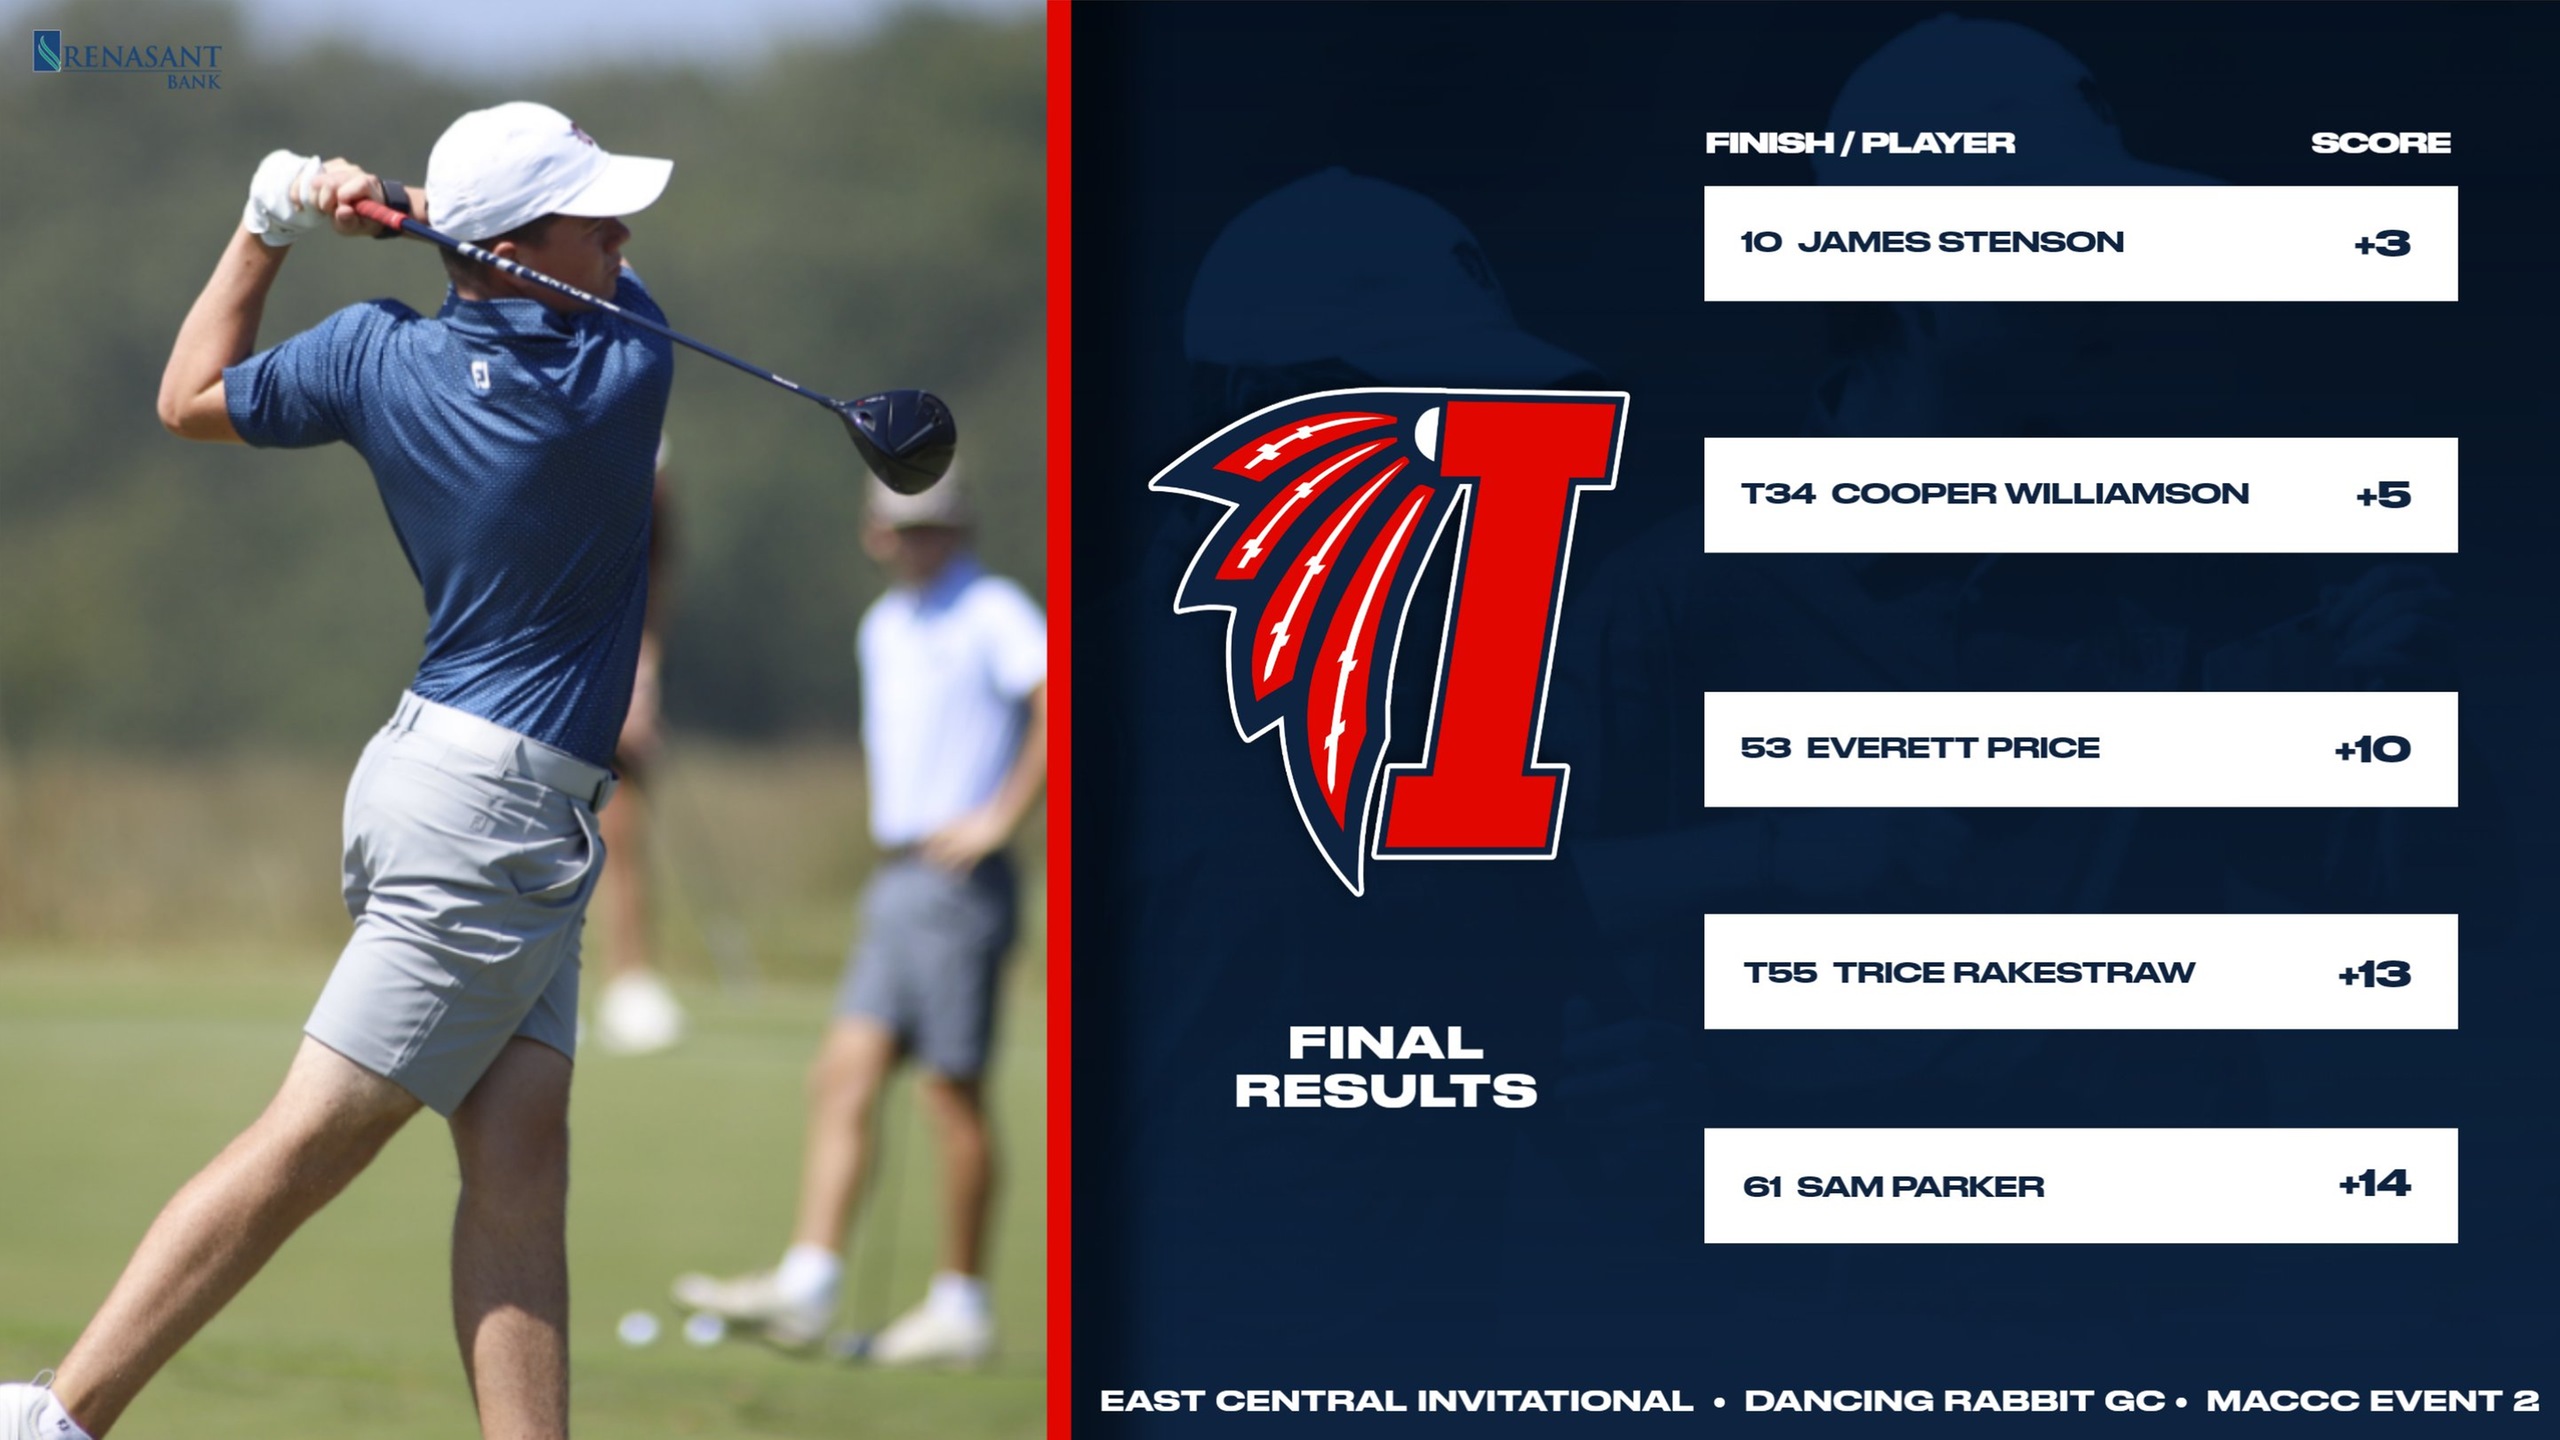 Golf finishes tenth at East Central Invitational